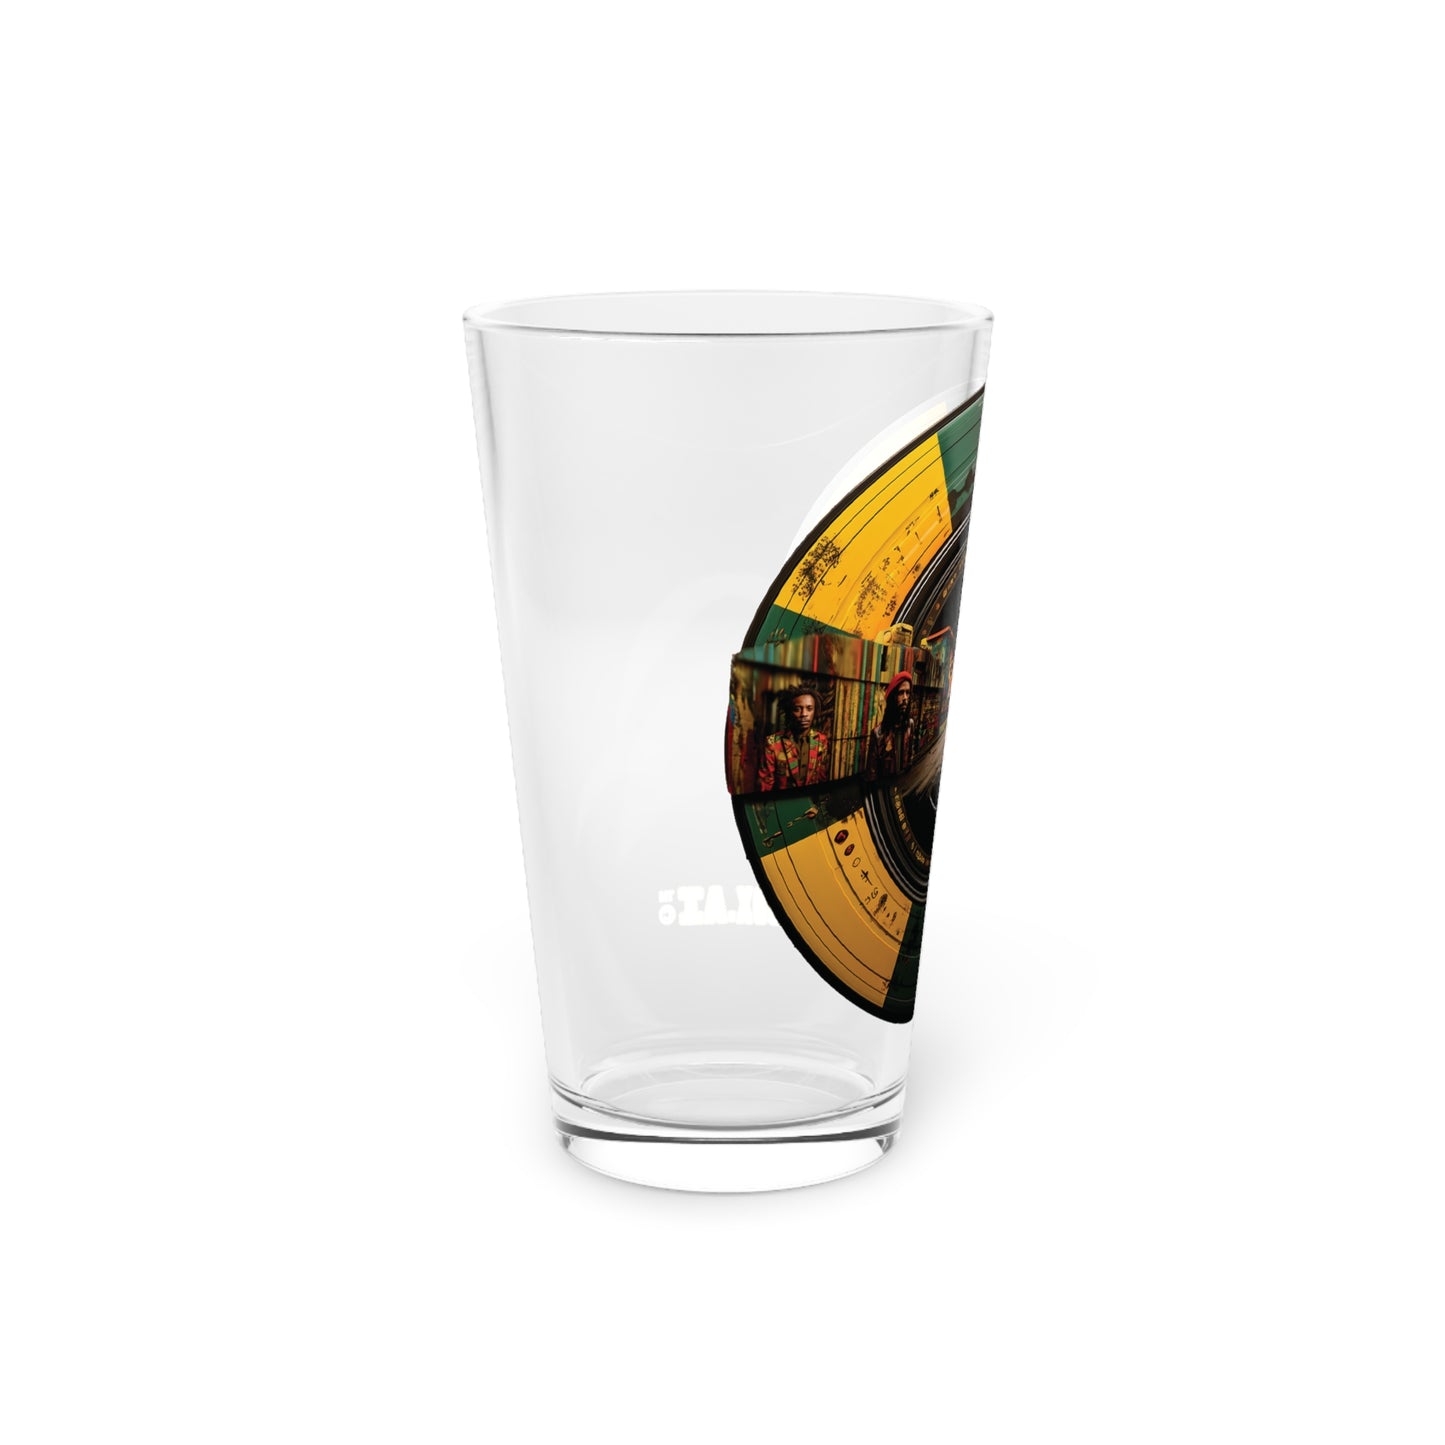 Raise the Vibe with our Rasta Record Psychedelic Design #005 Pint Glass. Sip in style, exclusively at Stashbox.ai.